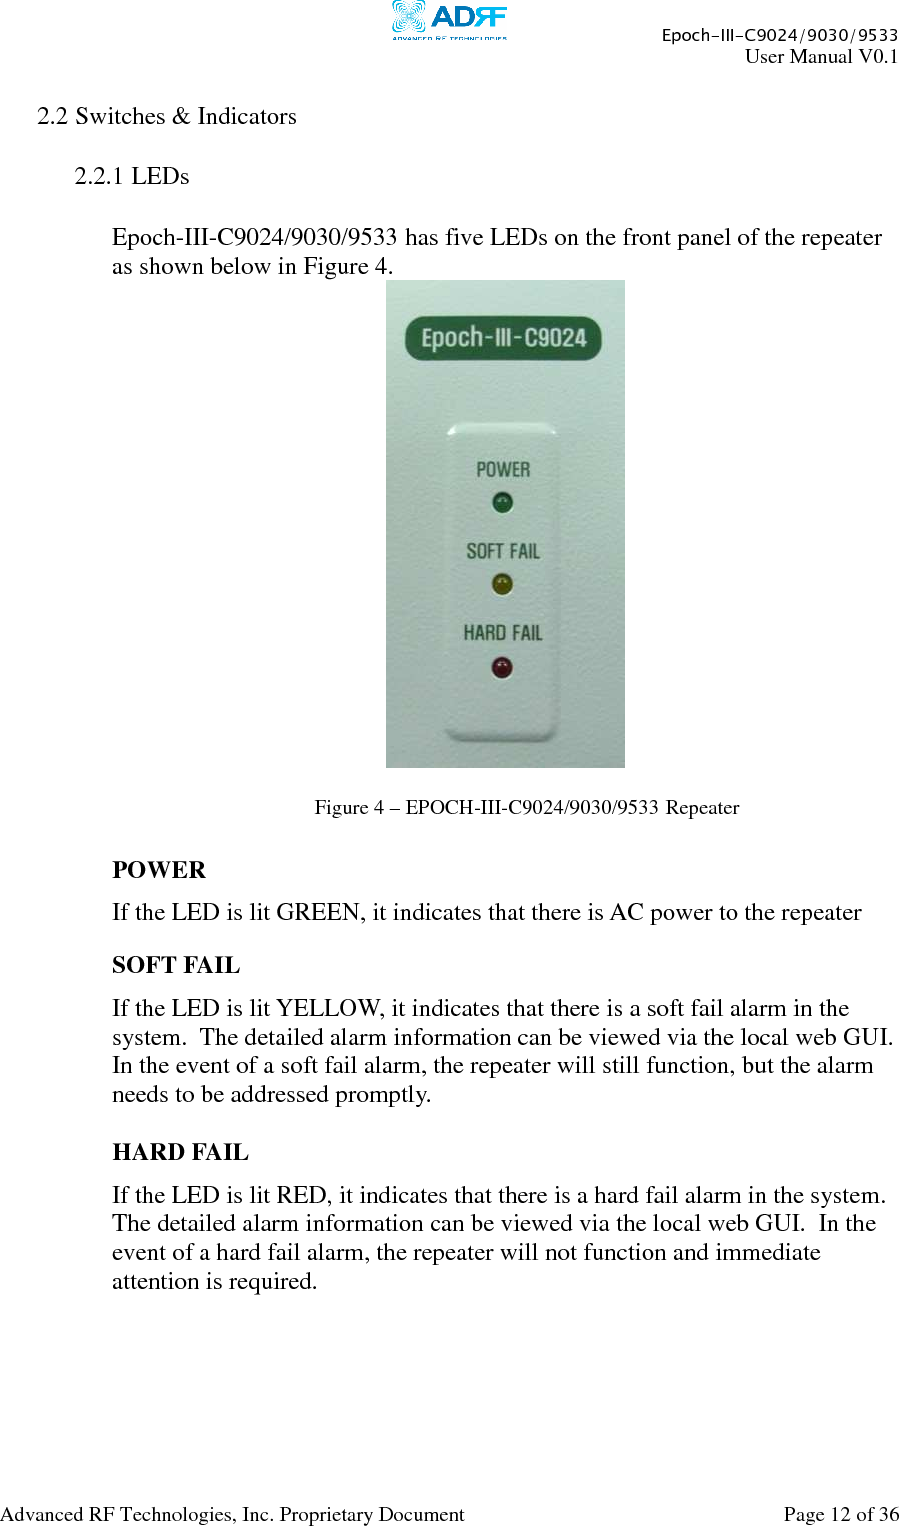     Epoch-III-C9024/9030/9533 User Manual V0.1  Advanced RF Technologies, Inc. Proprietary Document  Page 12 of 36   2.2 Switches &amp; Indicators  2.2.1 LEDs  Epoch-III-C9024/9030/9533 has five LEDs on the front panel of the repeater as shown below in Figure 4.    POWER If the LED is lit GREEN, it indicates that there is AC power to the repeater  SOFT FAIL If the LED is lit YELLOW, it indicates that there is a soft fail alarm in the system.  The detailed alarm information can be viewed via the local web GUI.  In the event of a soft fail alarm, the repeater will still function, but the alarm needs to be addressed promptly.  HARD FAIL If the LED is lit RED, it indicates that there is a hard fail alarm in the system.  The detailed alarm information can be viewed via the local web GUI.  In the event of a hard fail alarm, the repeater will not function and immediate attention is required.   Figure 4 – EPOCH-III-C9024/9030/9533 Repeater 